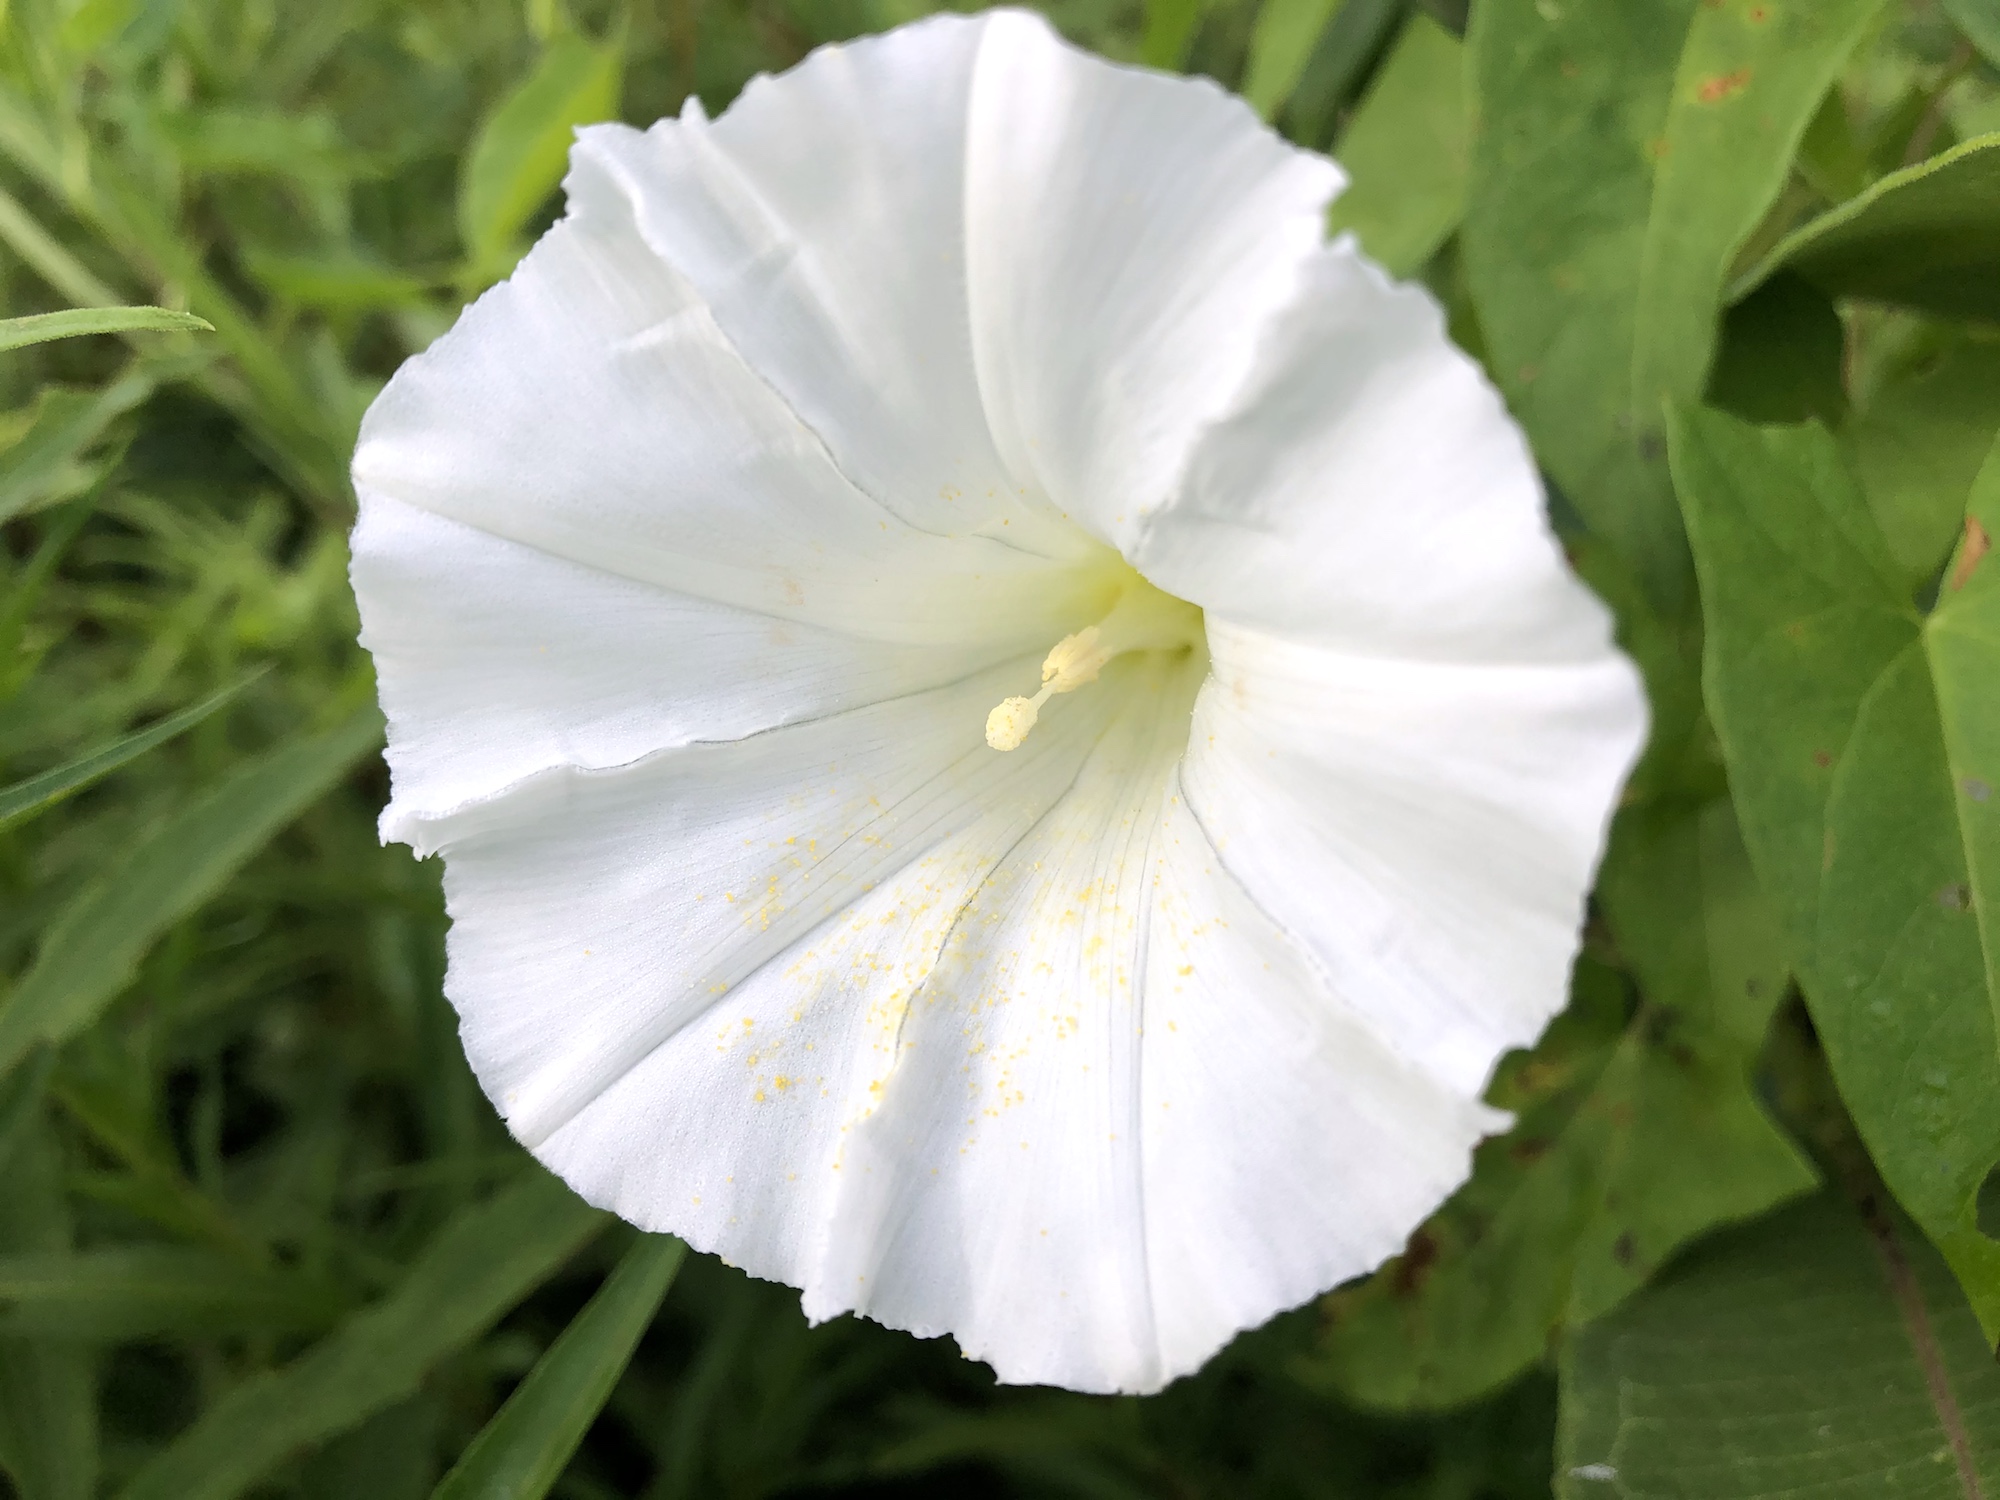 Hedge Bindweed surrounding a telephone pole on Monroe Street in Madison, Wisconsin on August 1, 2020.